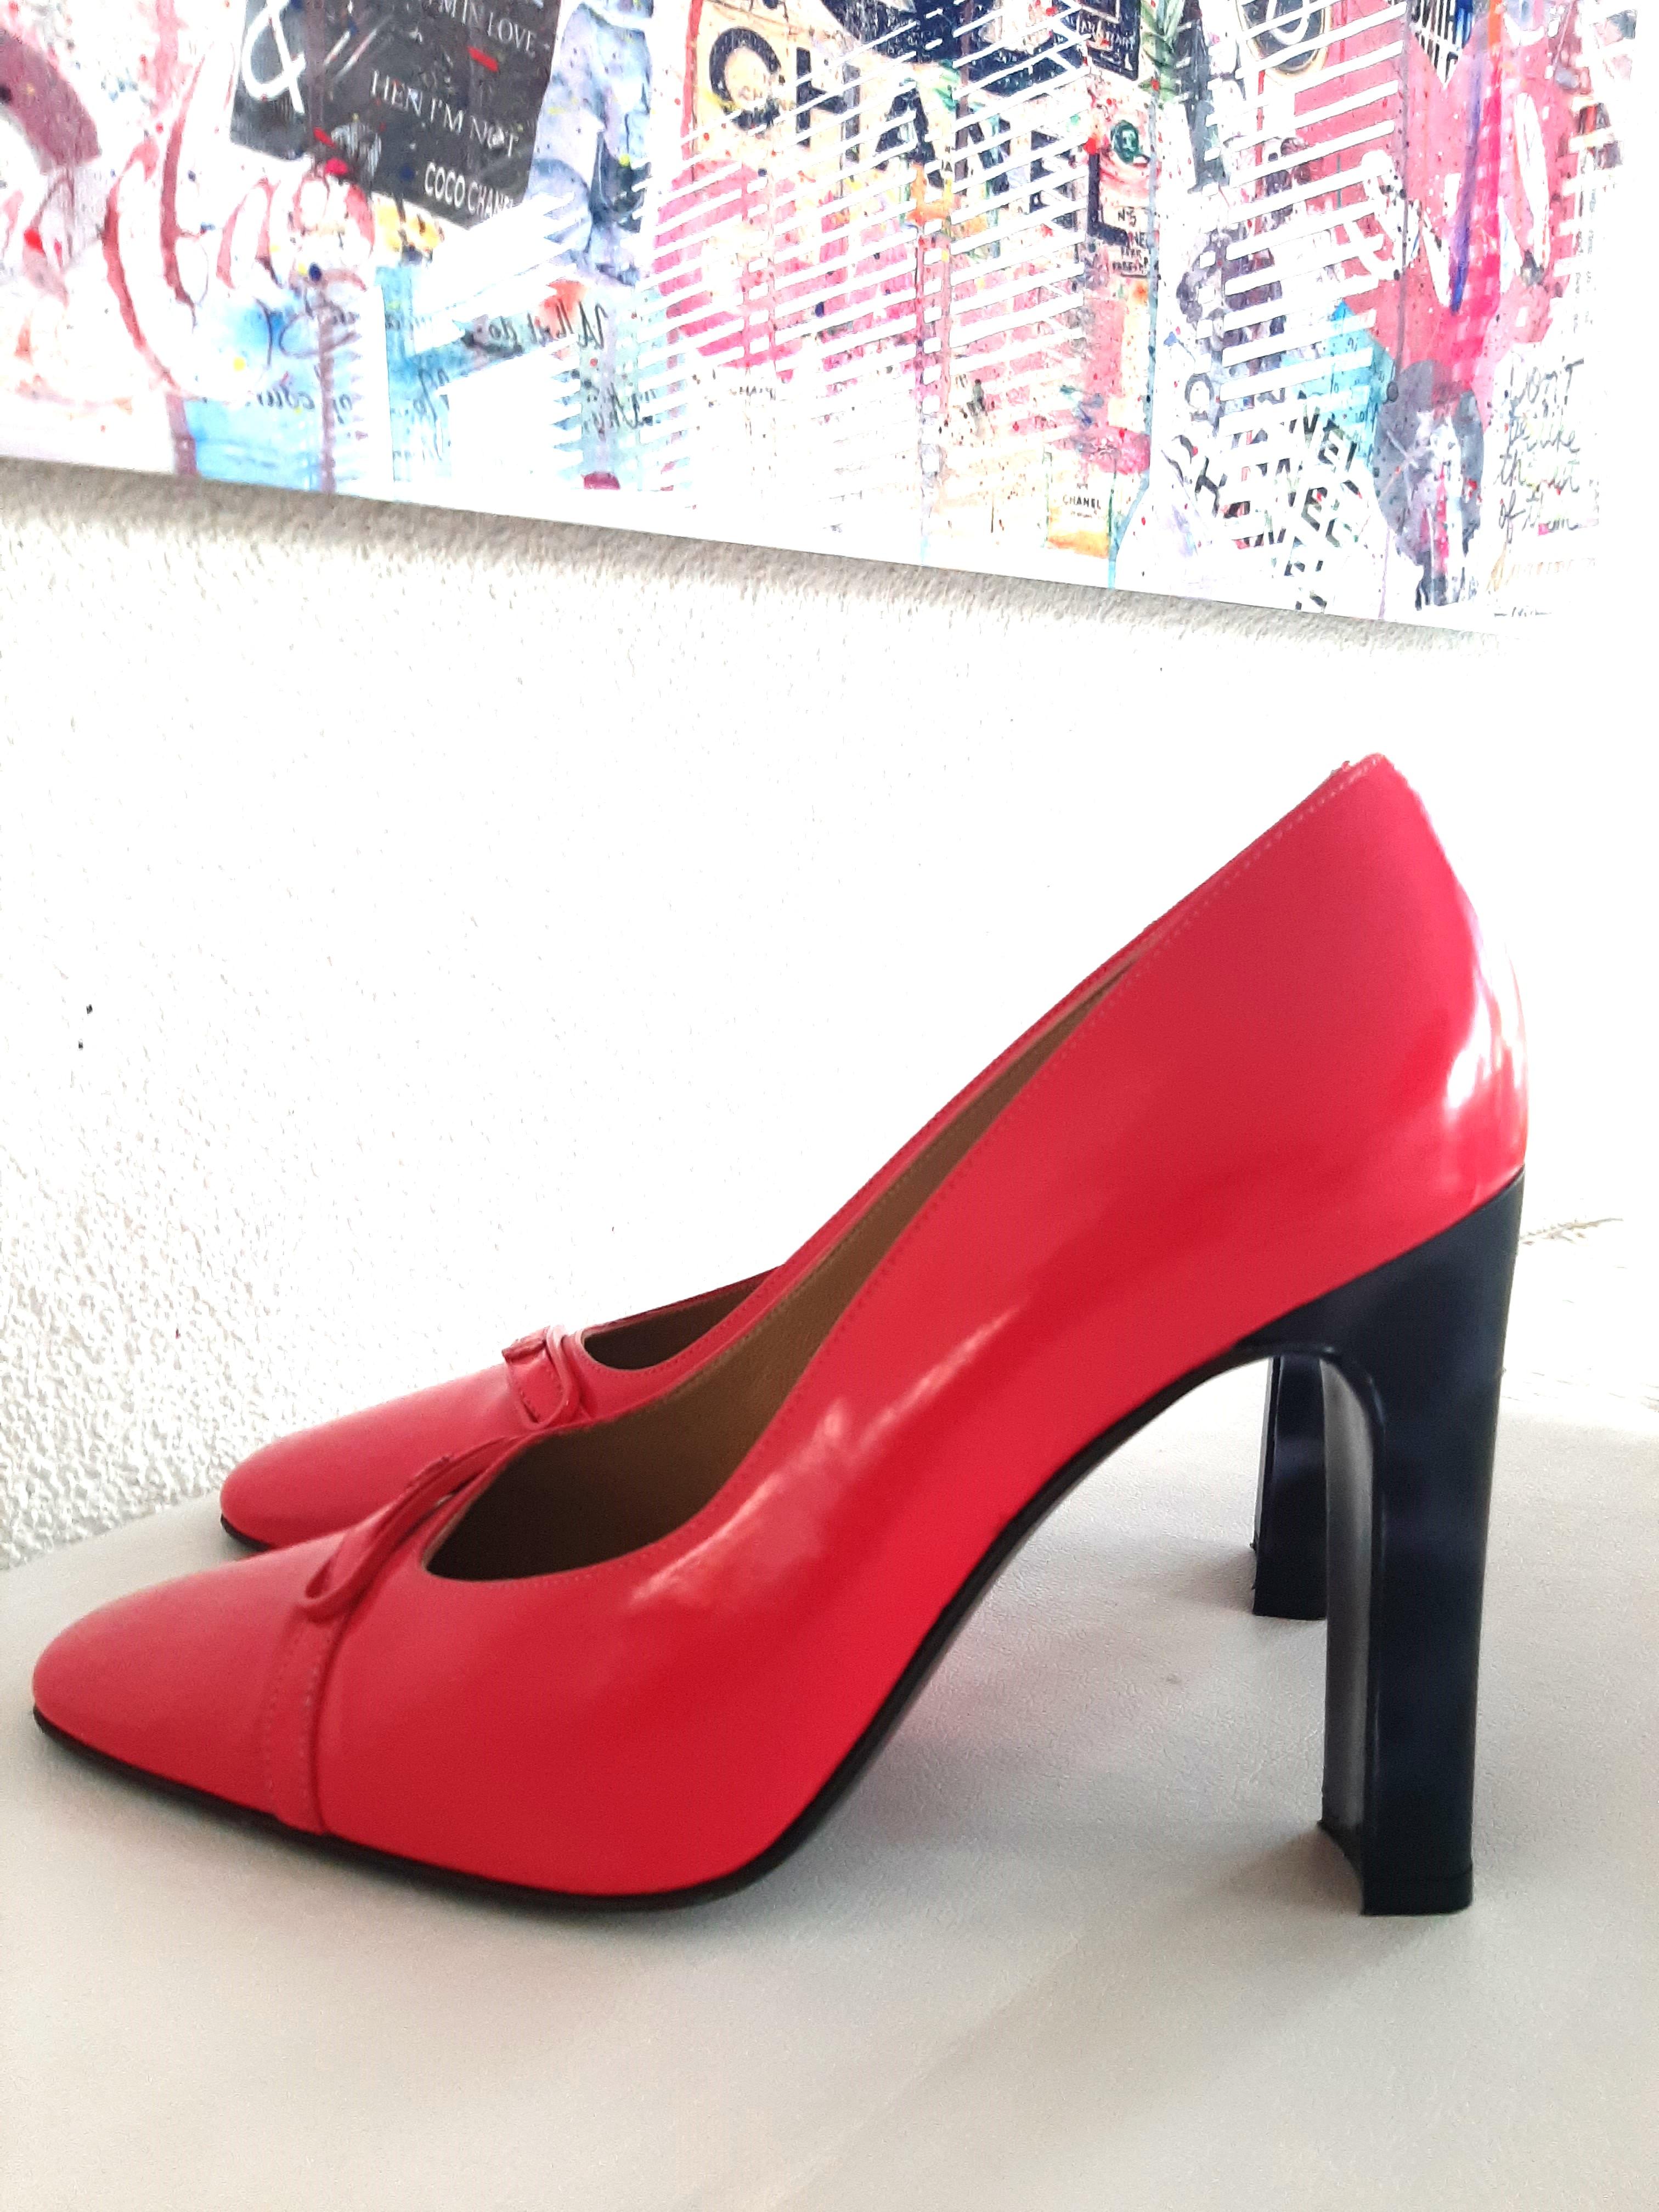 Gianni Versace rare iconic pinkred high heels from the 90s with a little Medusa head on it are a real eyecatcher! 

Gianni Versace was an iconic Italian fashion designer known for his bold and innovative designs. He was renowned for his extravagant